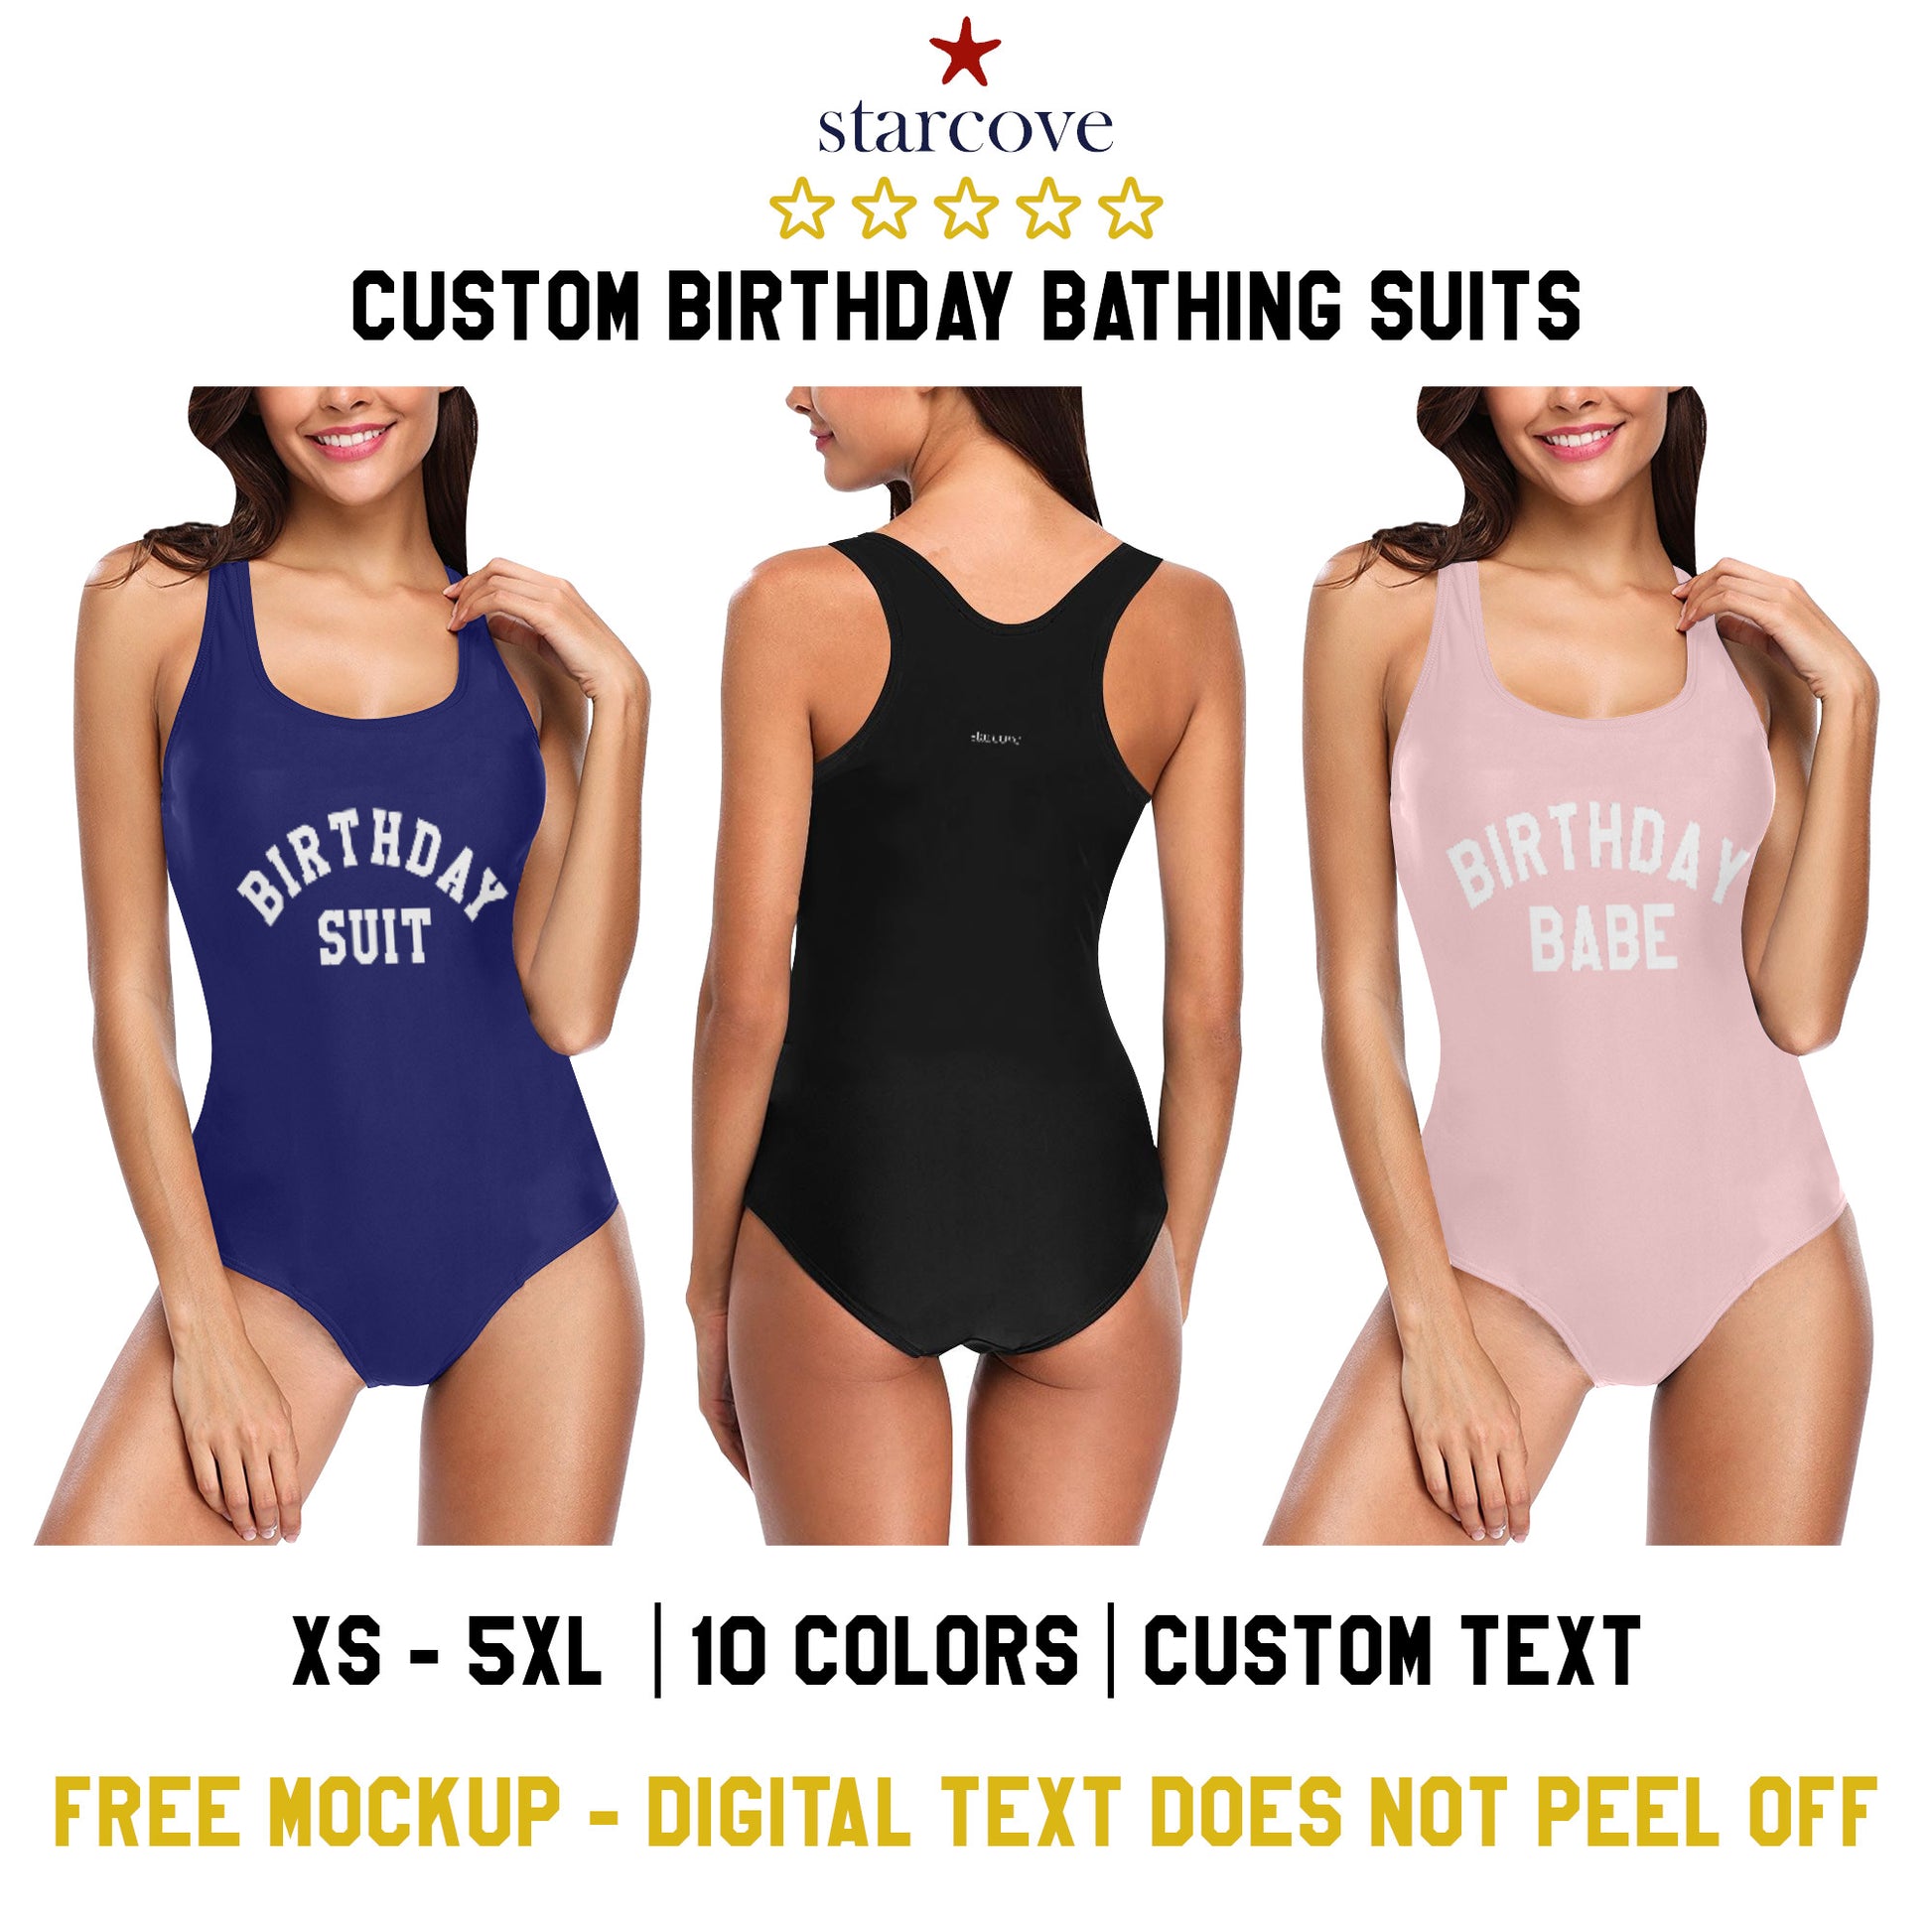 Custom Birthday Bathing Suit Women, Swimsuit for Her Babe Party Swim Gift Sexy Tank Top One Piece Swimwear Plus size Personalized Text Starcove Fashion